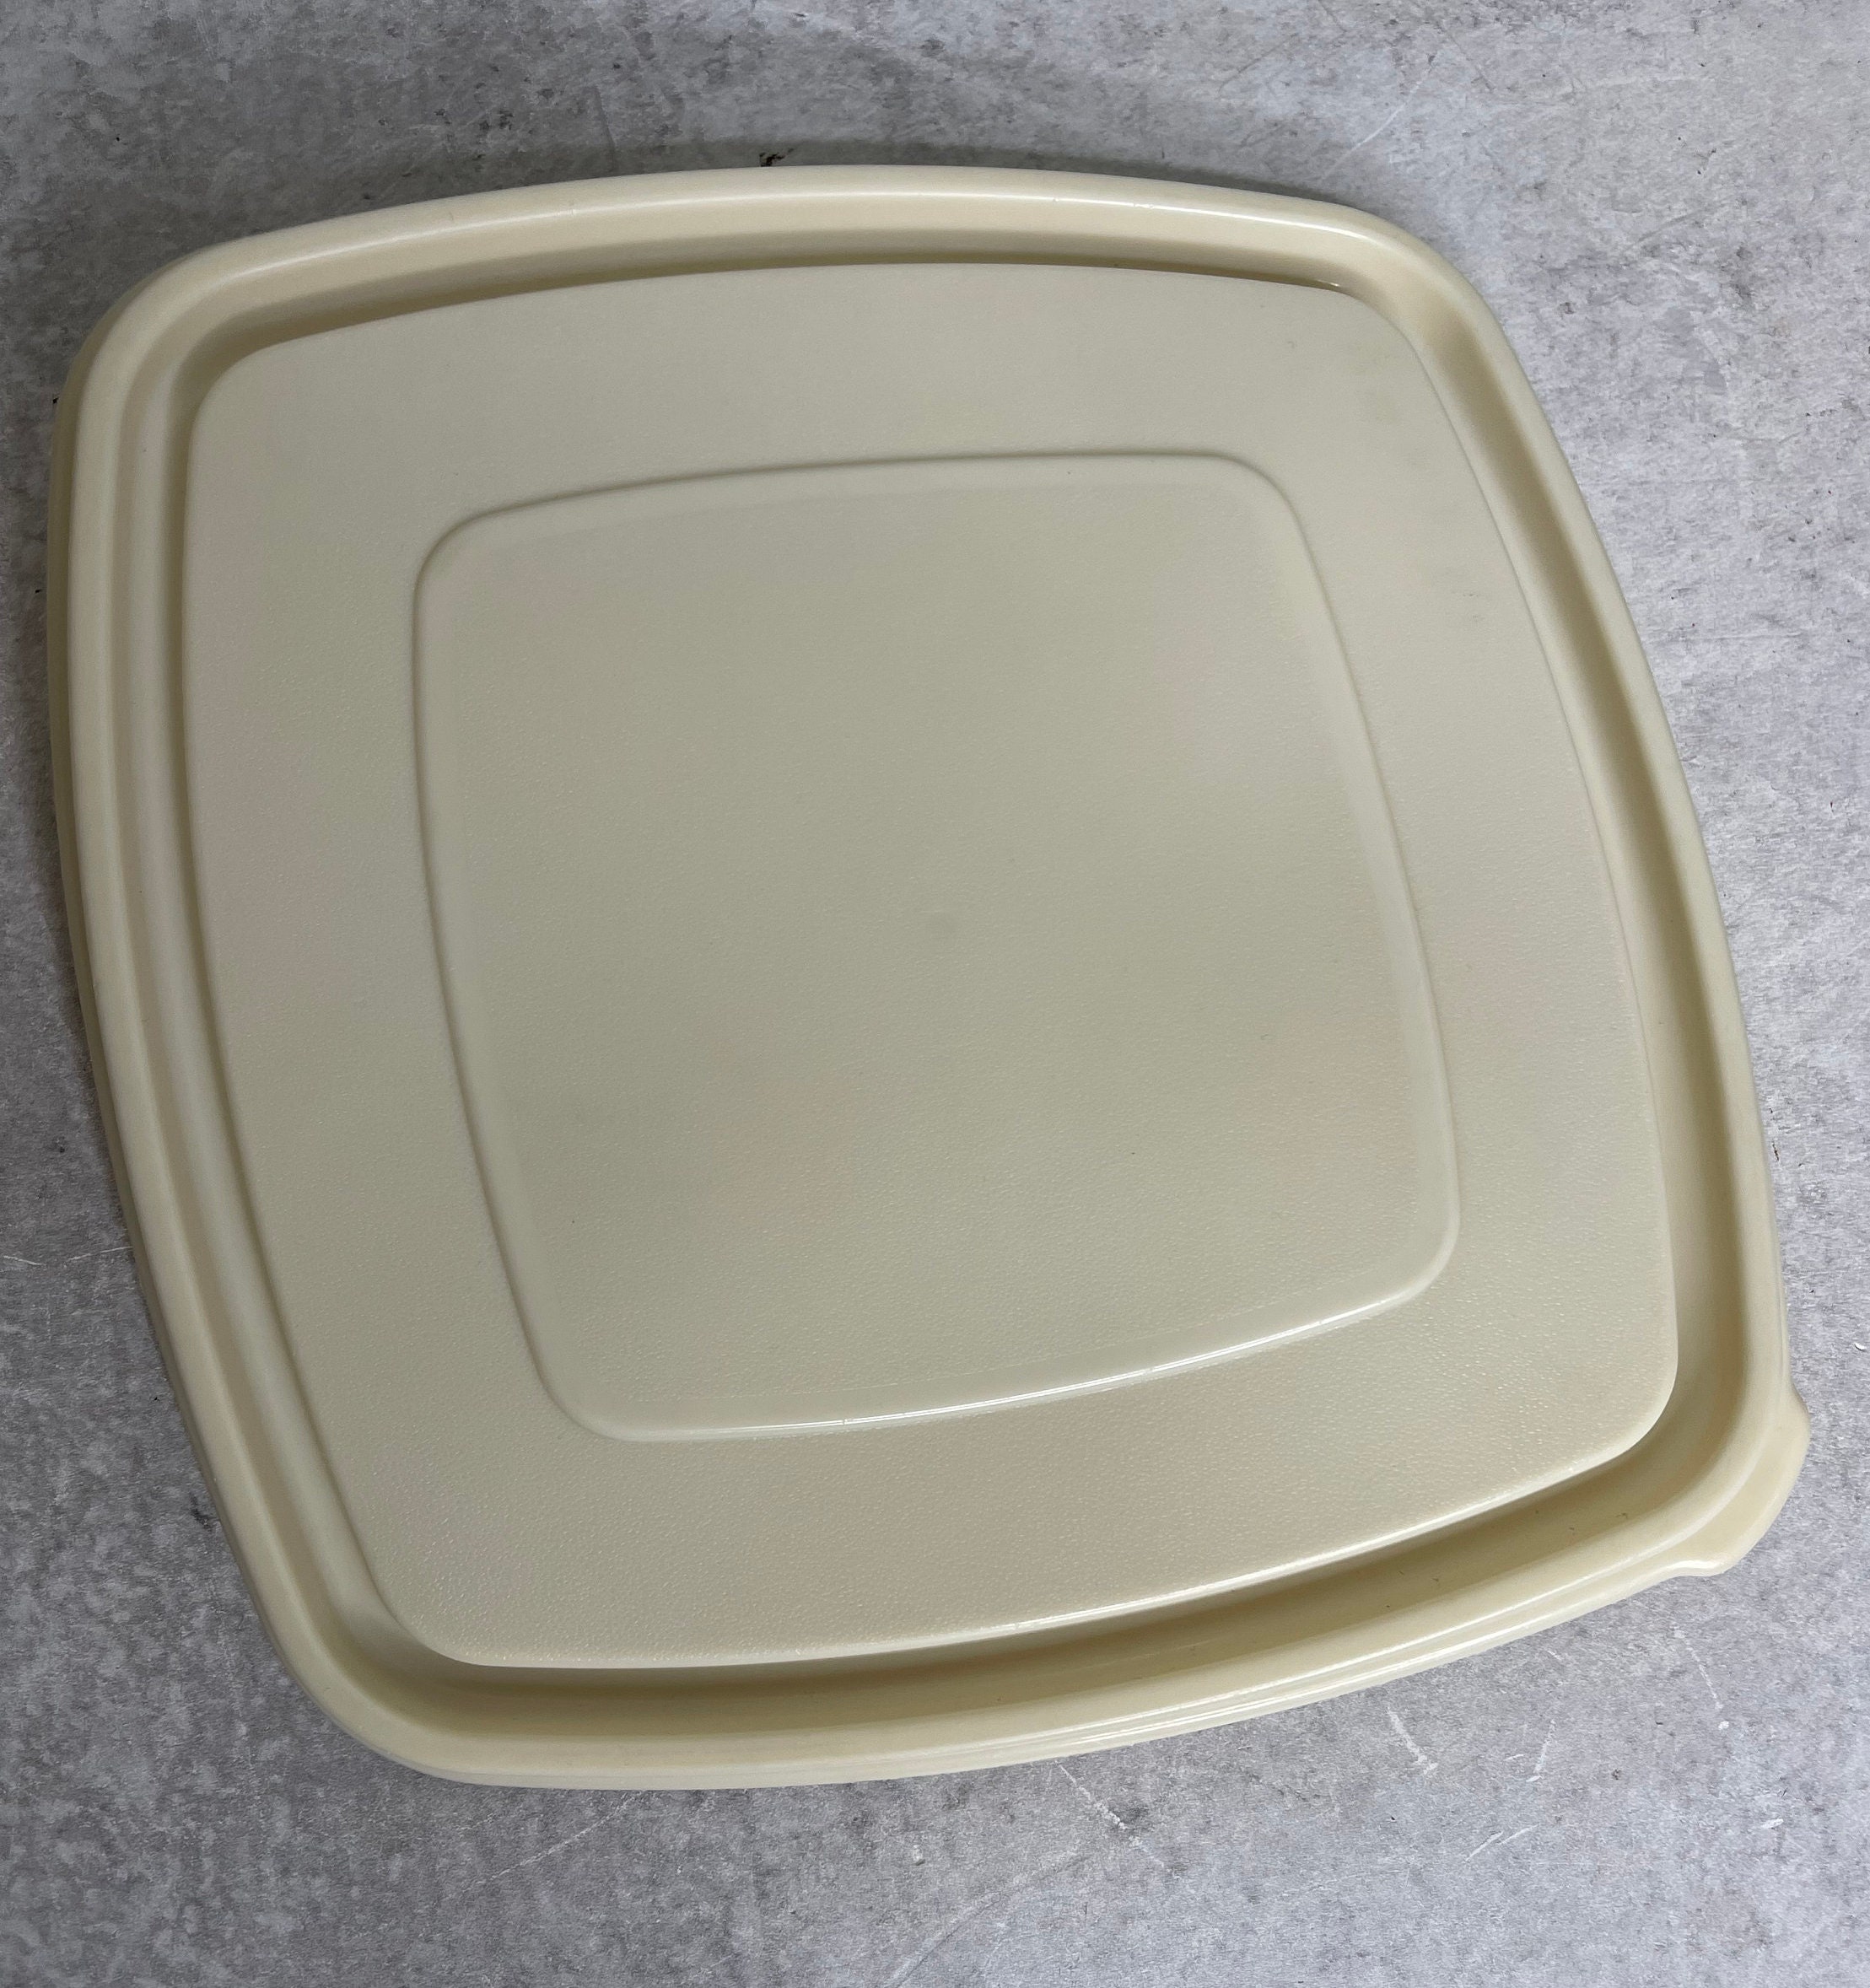 Rubbermaid Servin' Saver #7 Deviled Egg Keeper Container Almond Lid